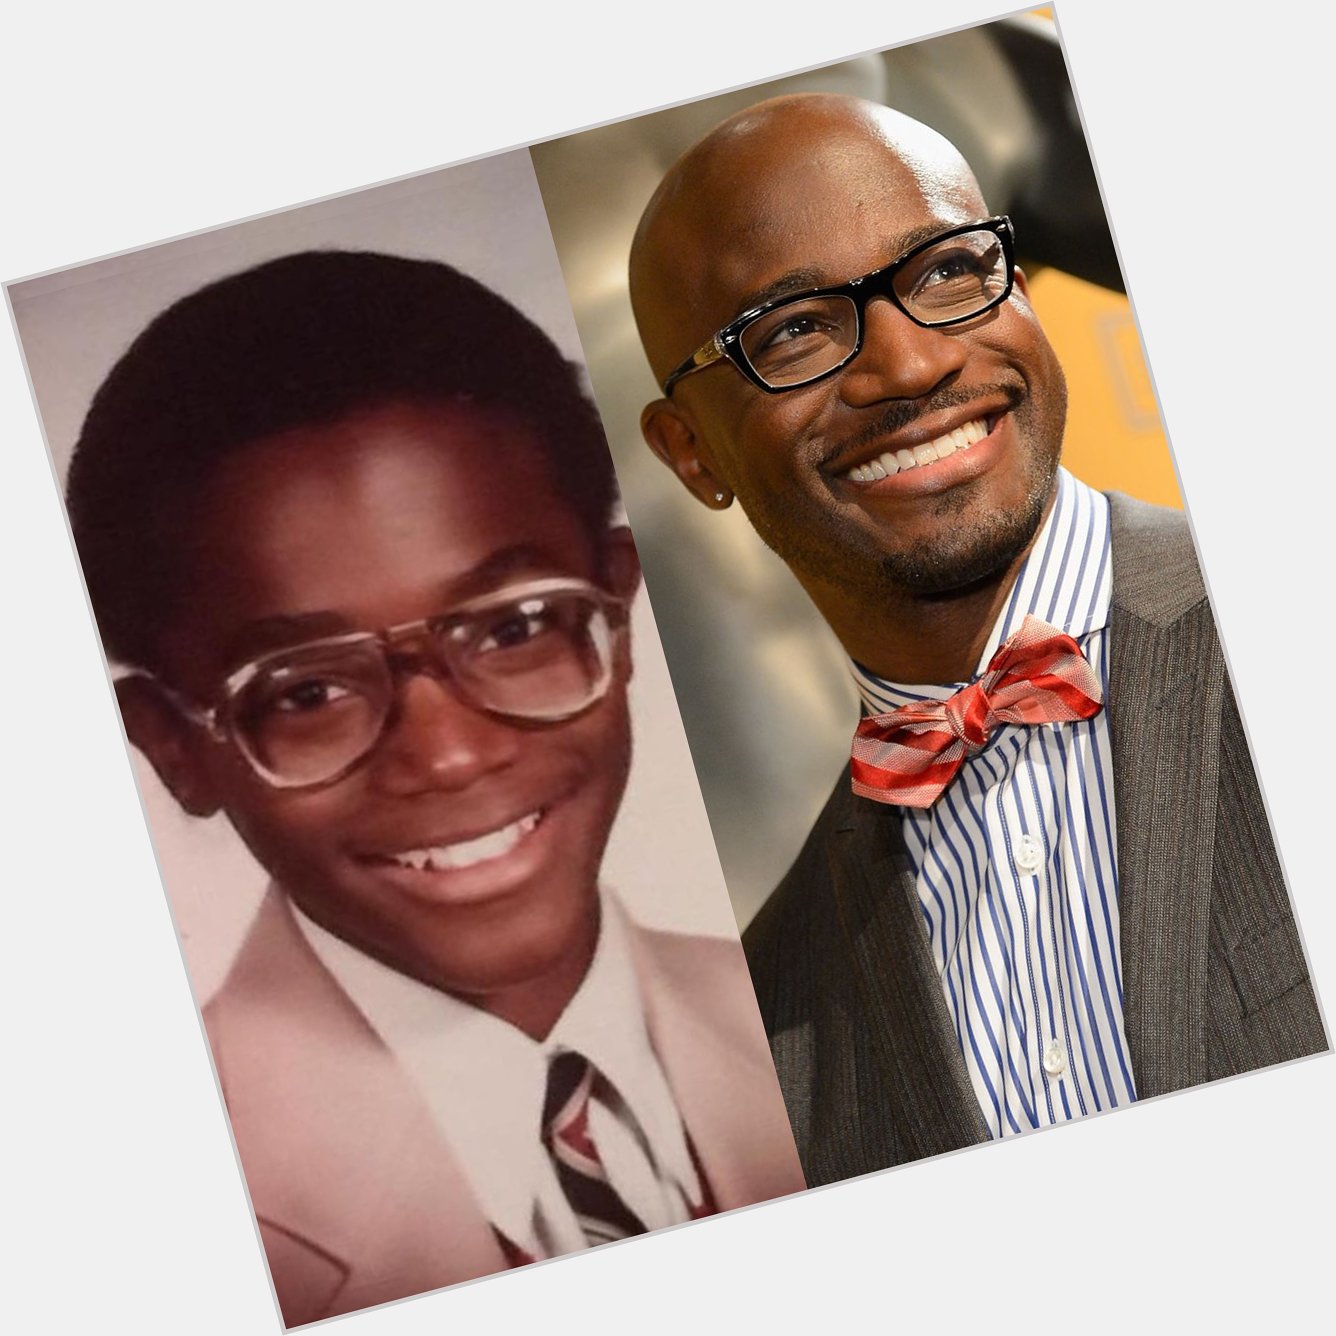 Happy Birthday Taye Diggs! What\s your favorite role of his? 